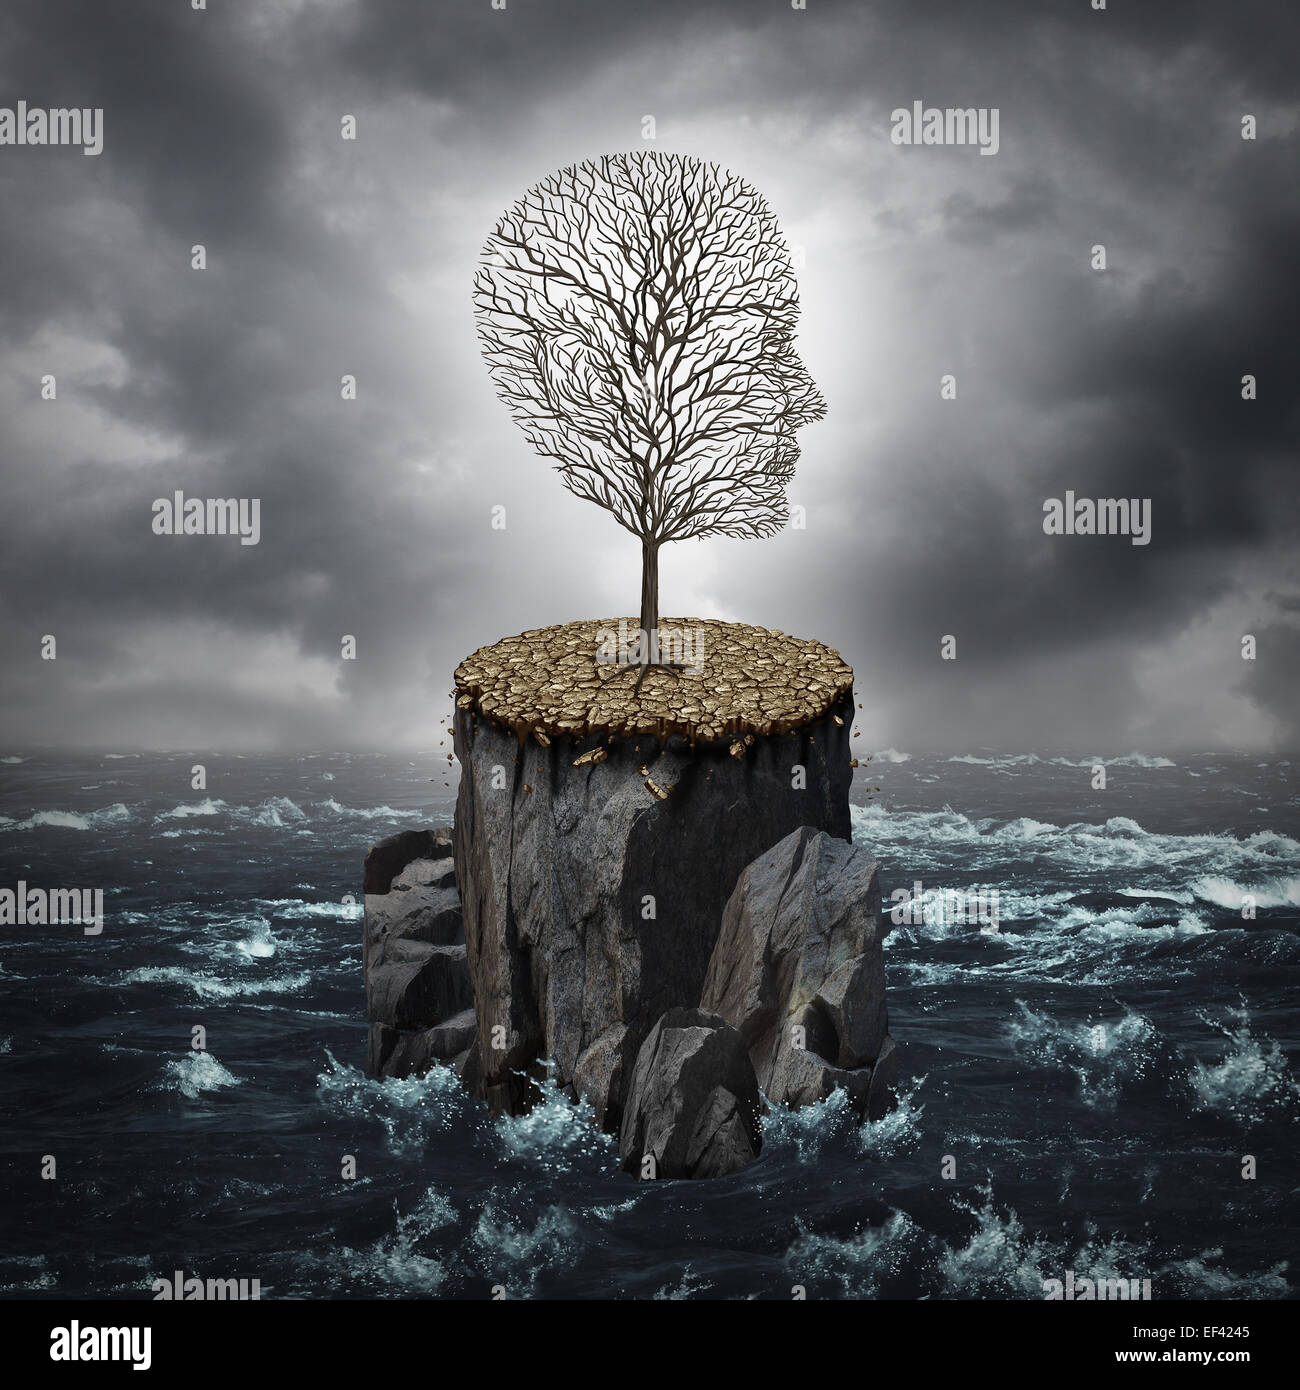 Failure crisis concept and lost business career or education opportunity metaphor as a dying tree shaped as a human head alone on a rock cliff with dry ground surrounded by an ocean. Stock Photo